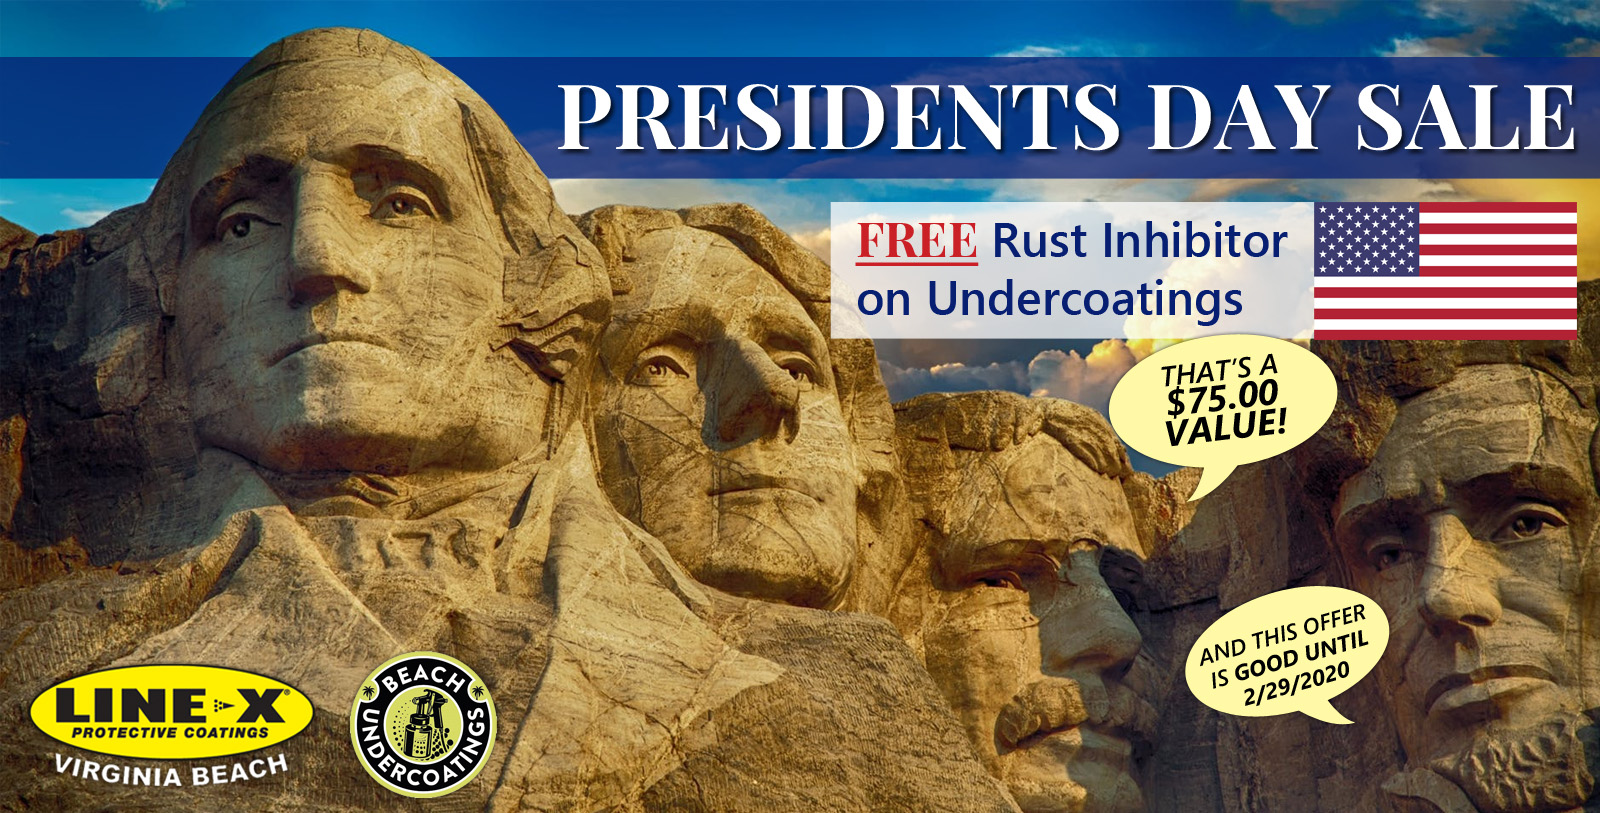 Presidents Day Sale - FREE Rust Inhibitor on Undercoatings!